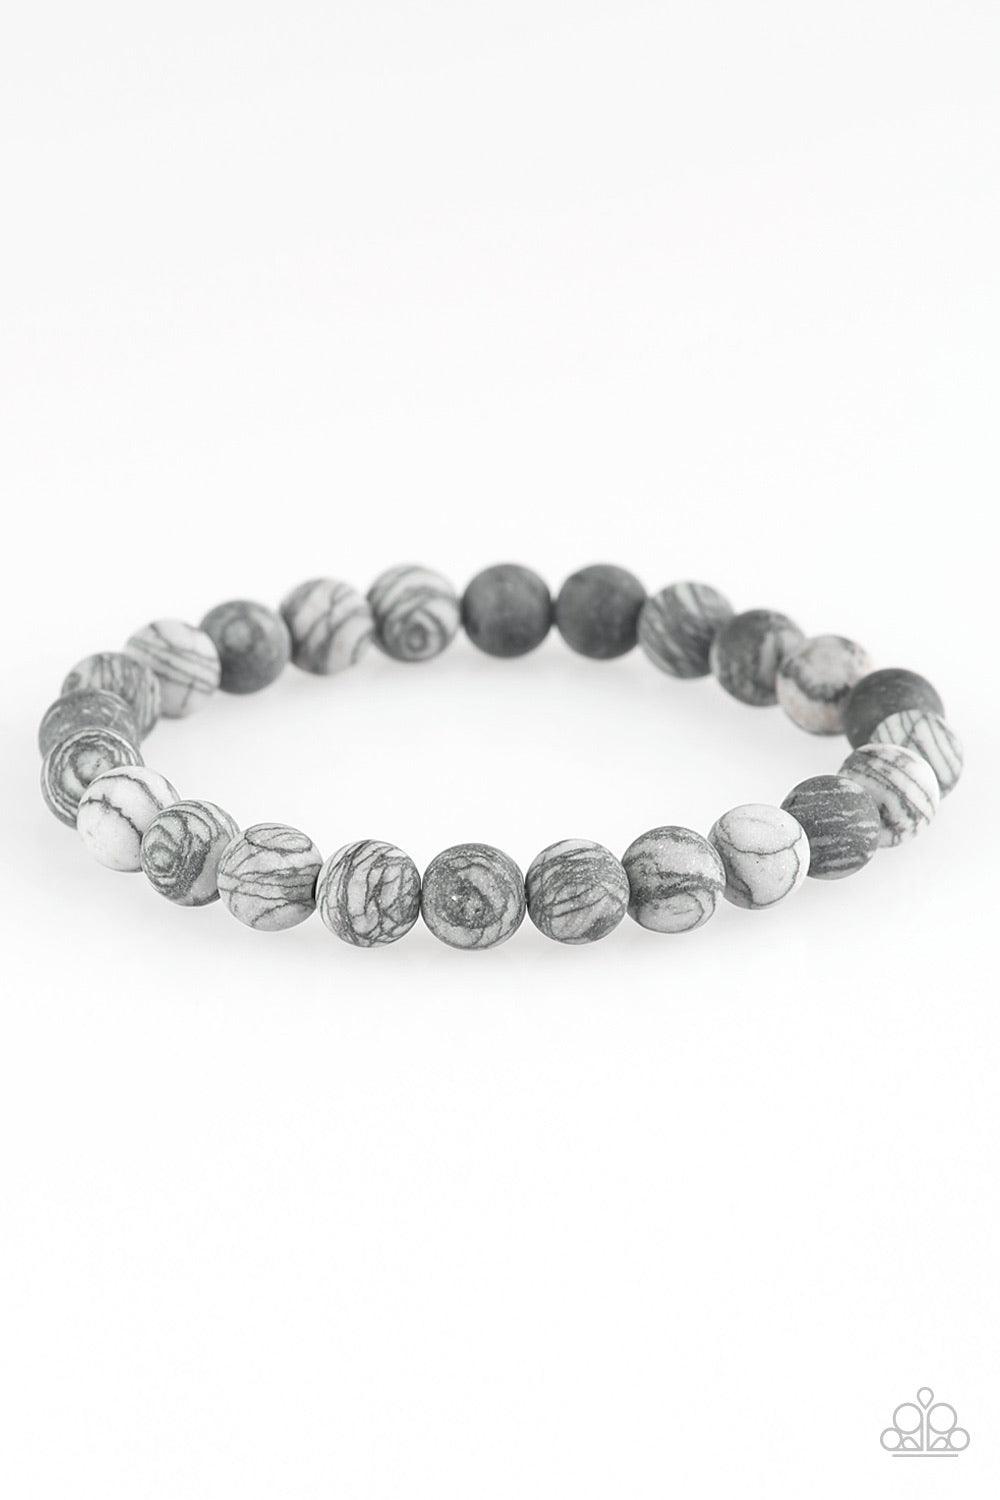 Paparazzi Accessories Oblivion - Silver Swirling with dizzying detail, natural stones are threaded along a stretchy band for a seasonal look. Sold as one individual bracelet. Jewelry